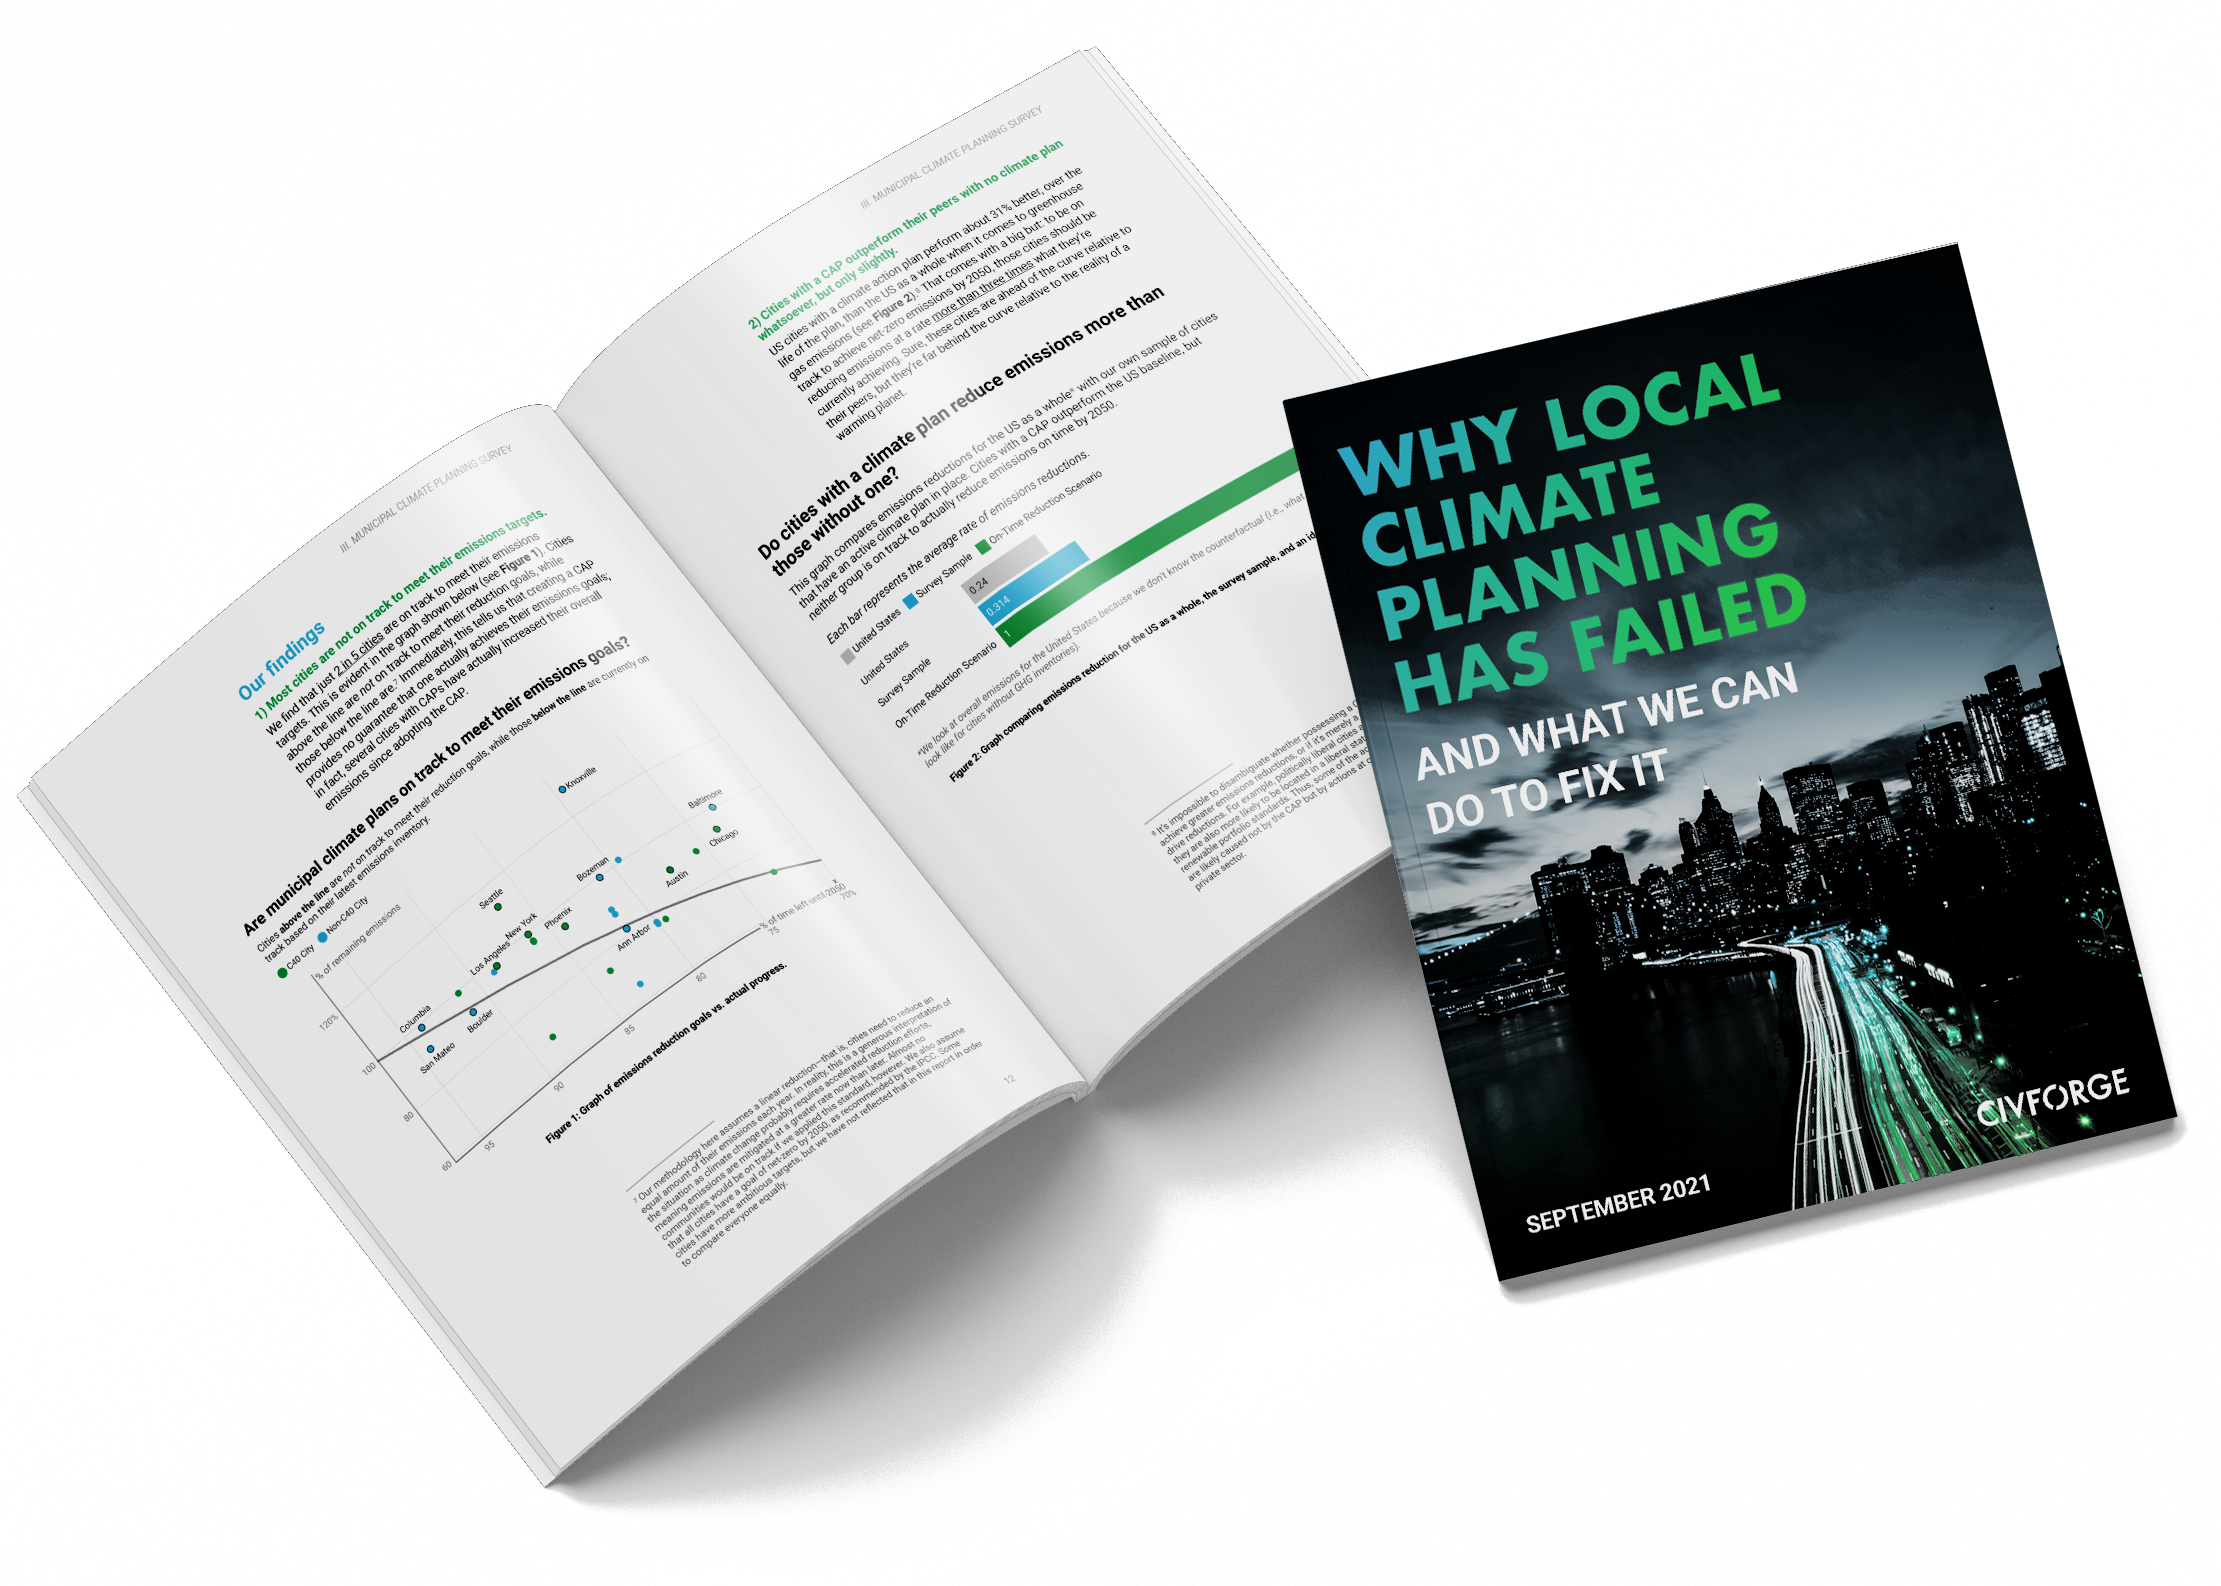 Why Local Climate Planning Has Failed Report